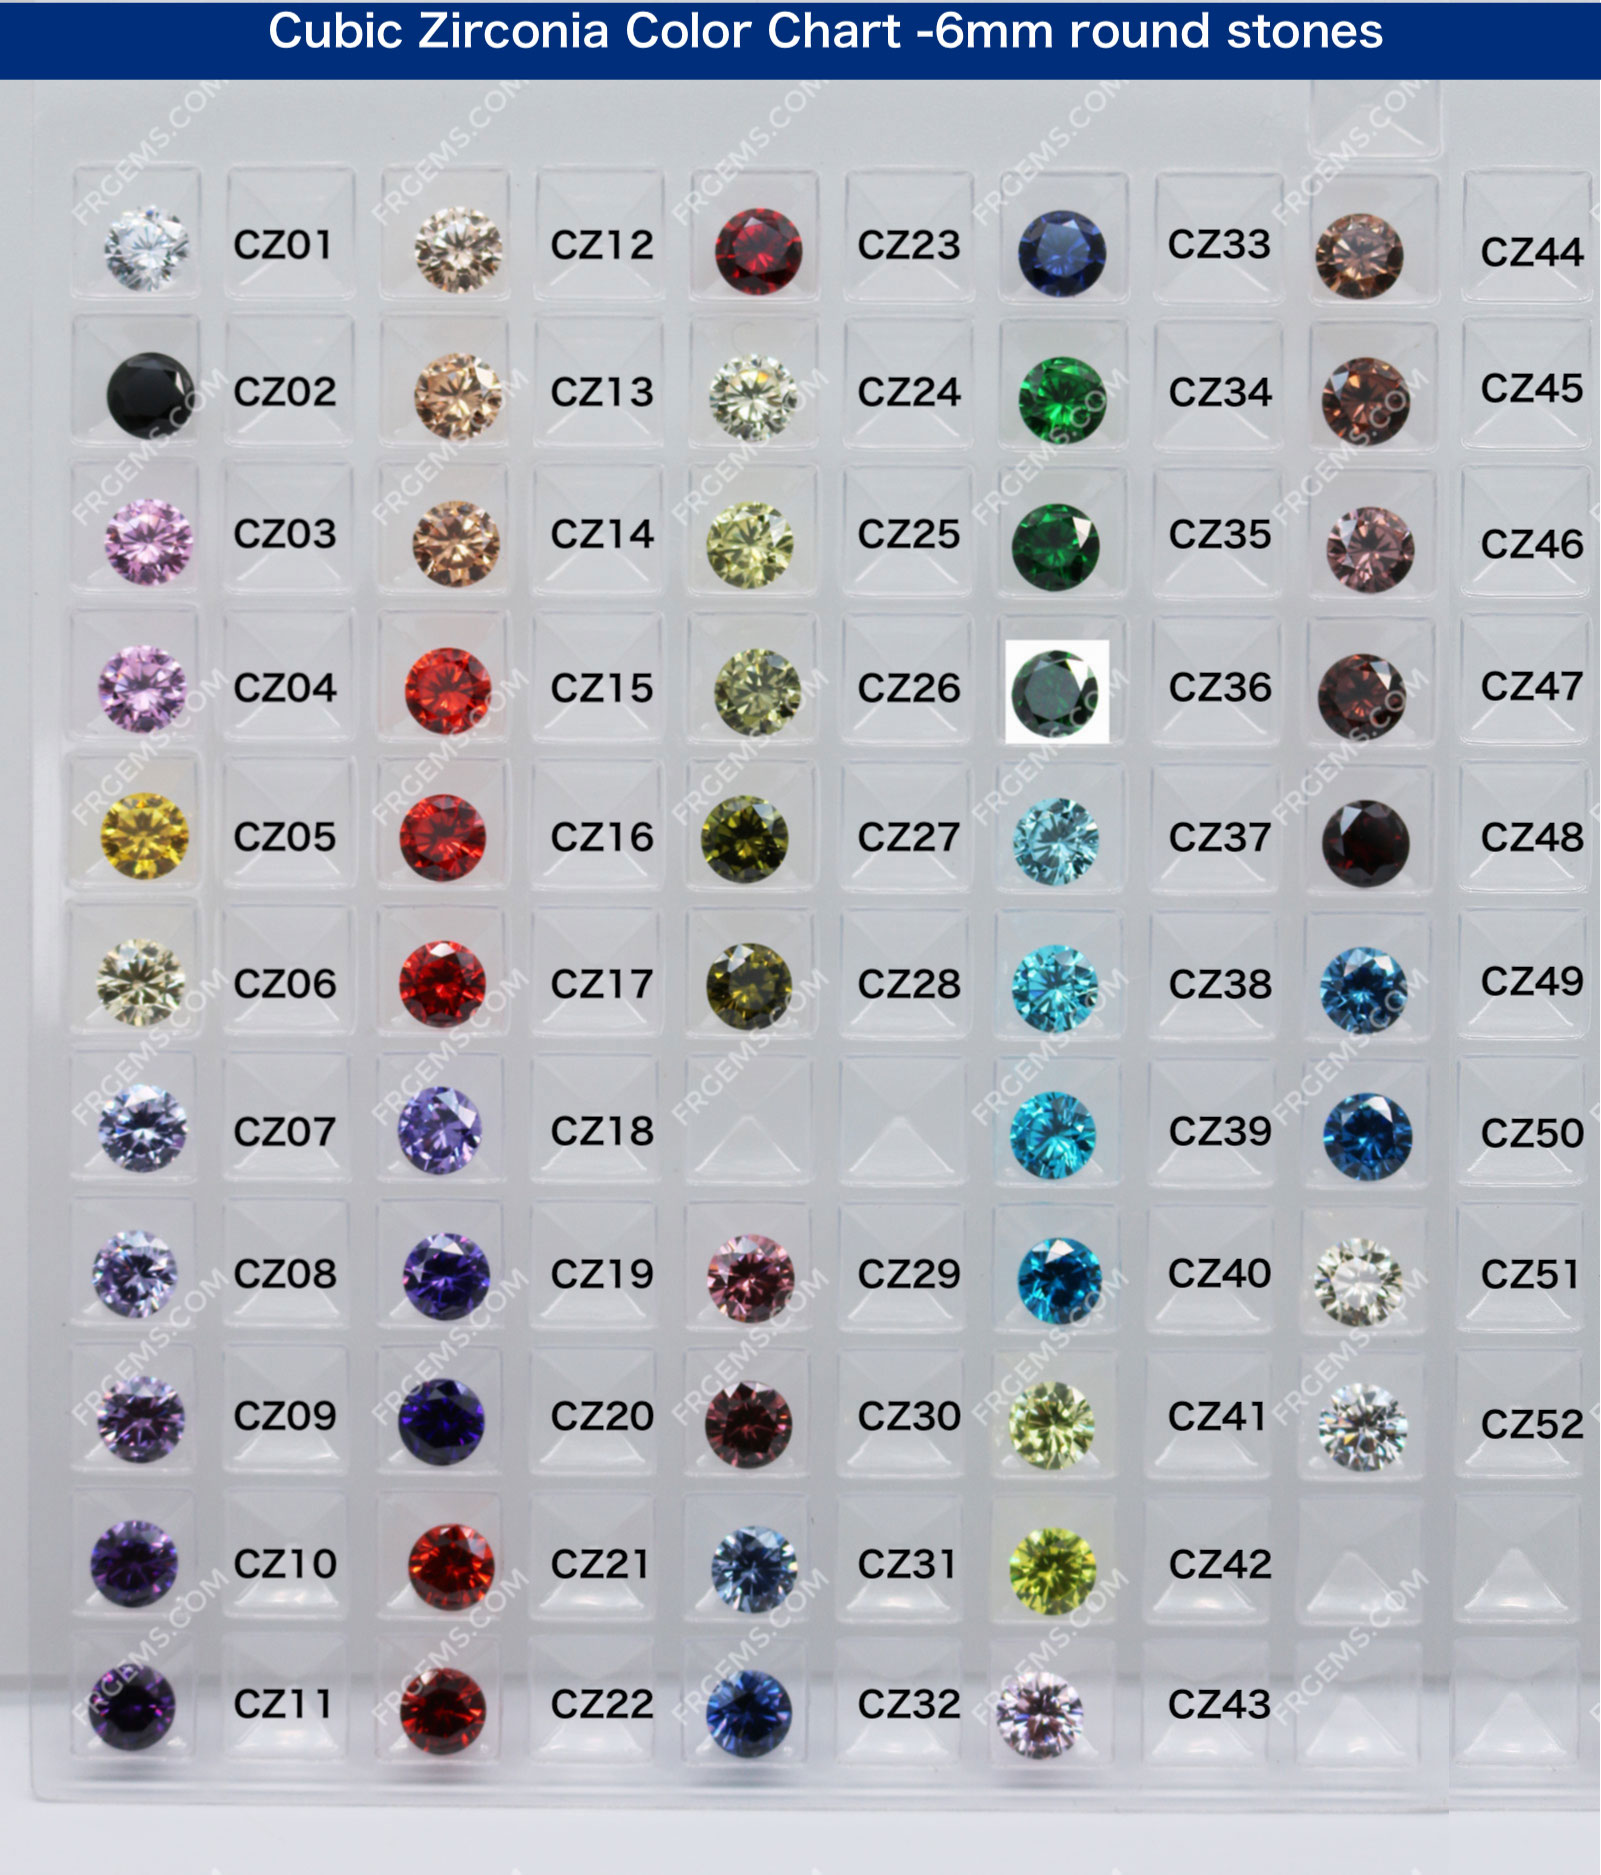 CUBIC ZIRCONIA COLOR CHARTS-Loose Gemstones Suppliers-FU RONG GEMS China